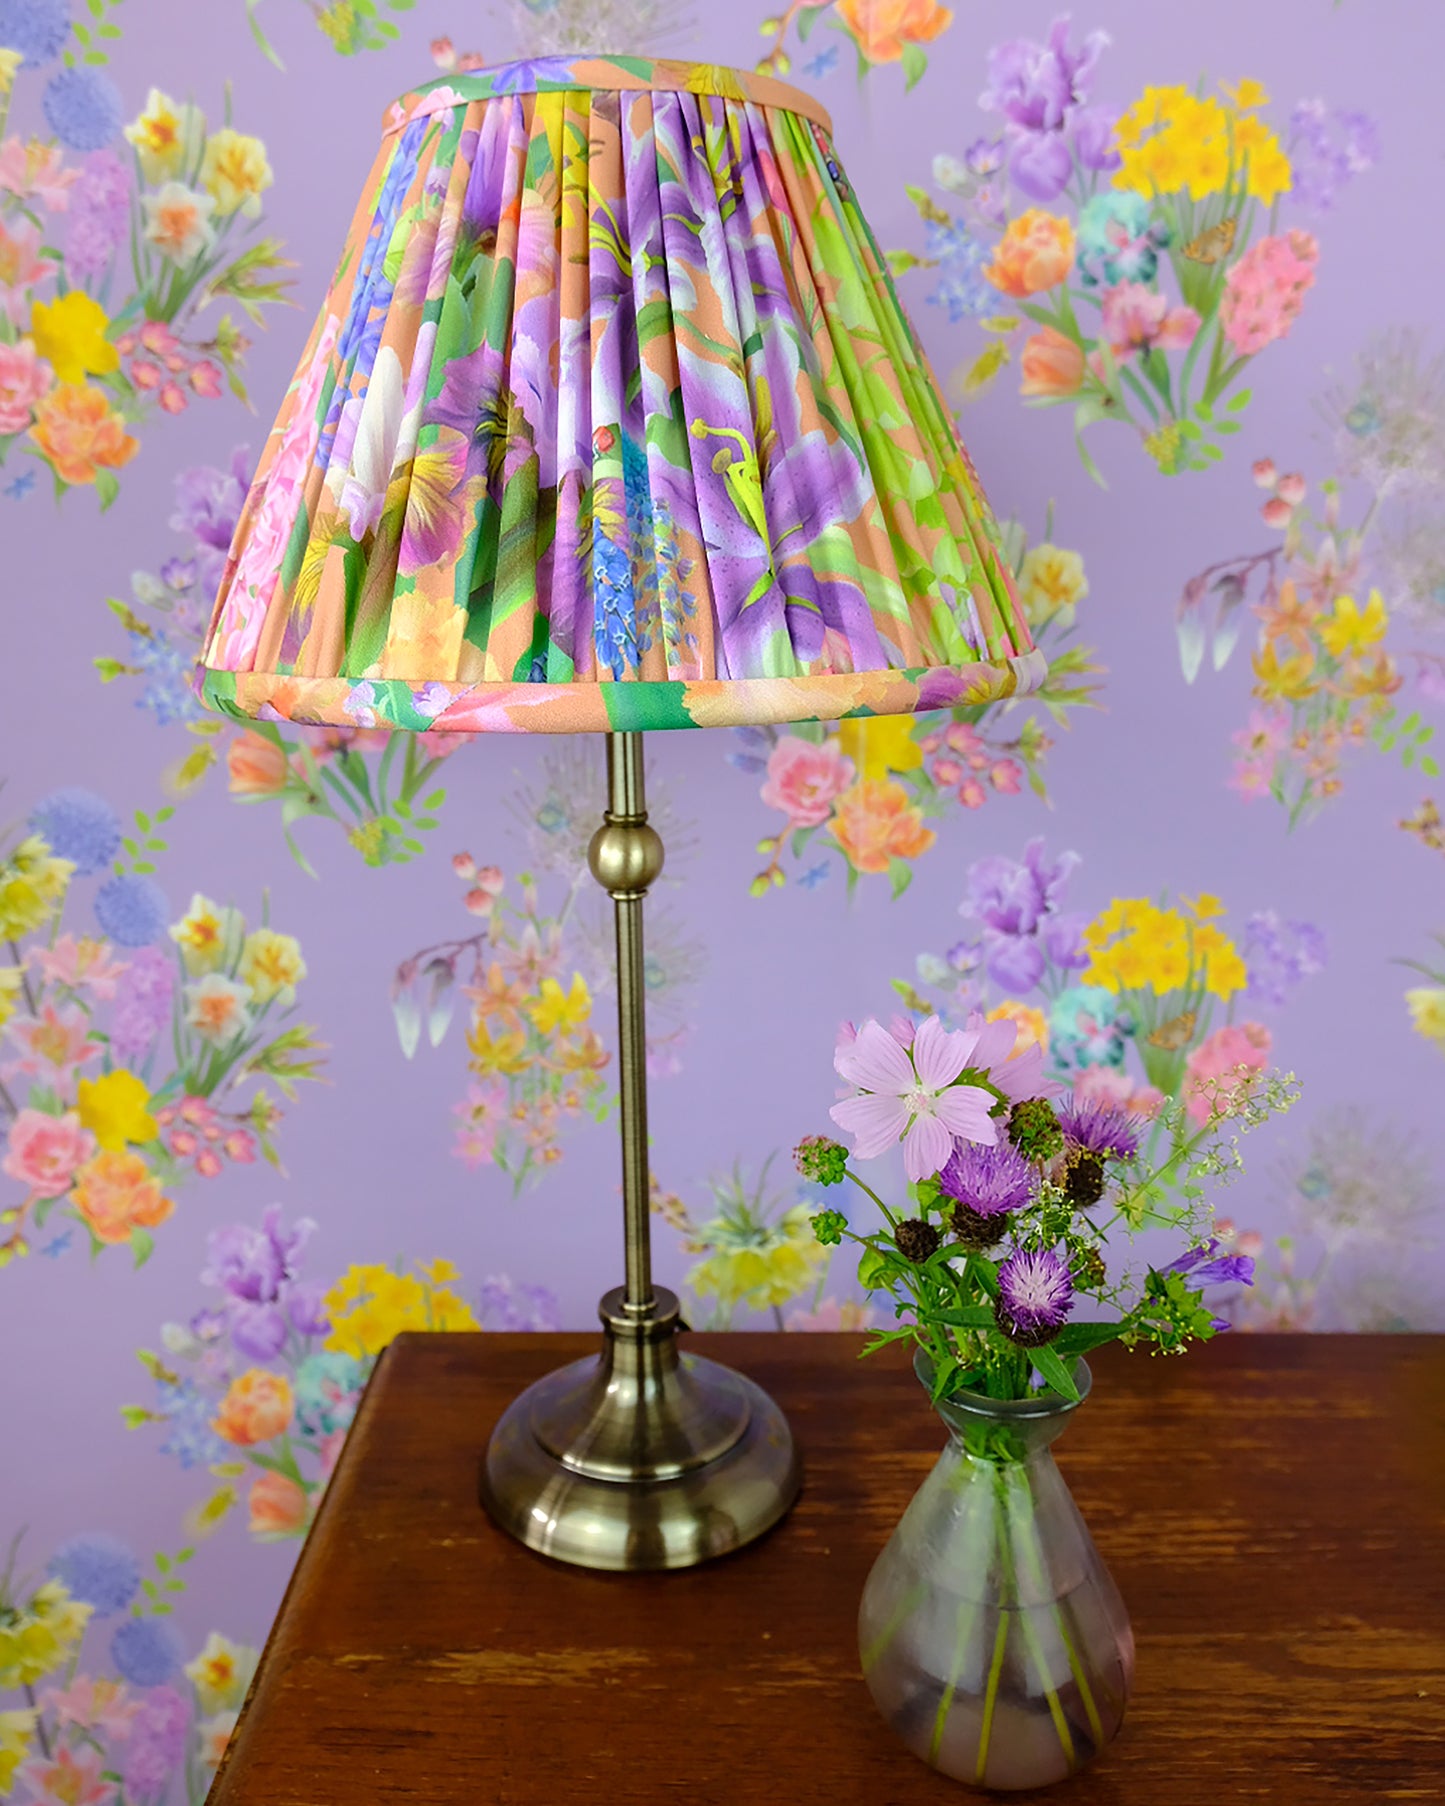 floral designer luxury fabric handcrafted into a sustainable lampshade in organic cotton